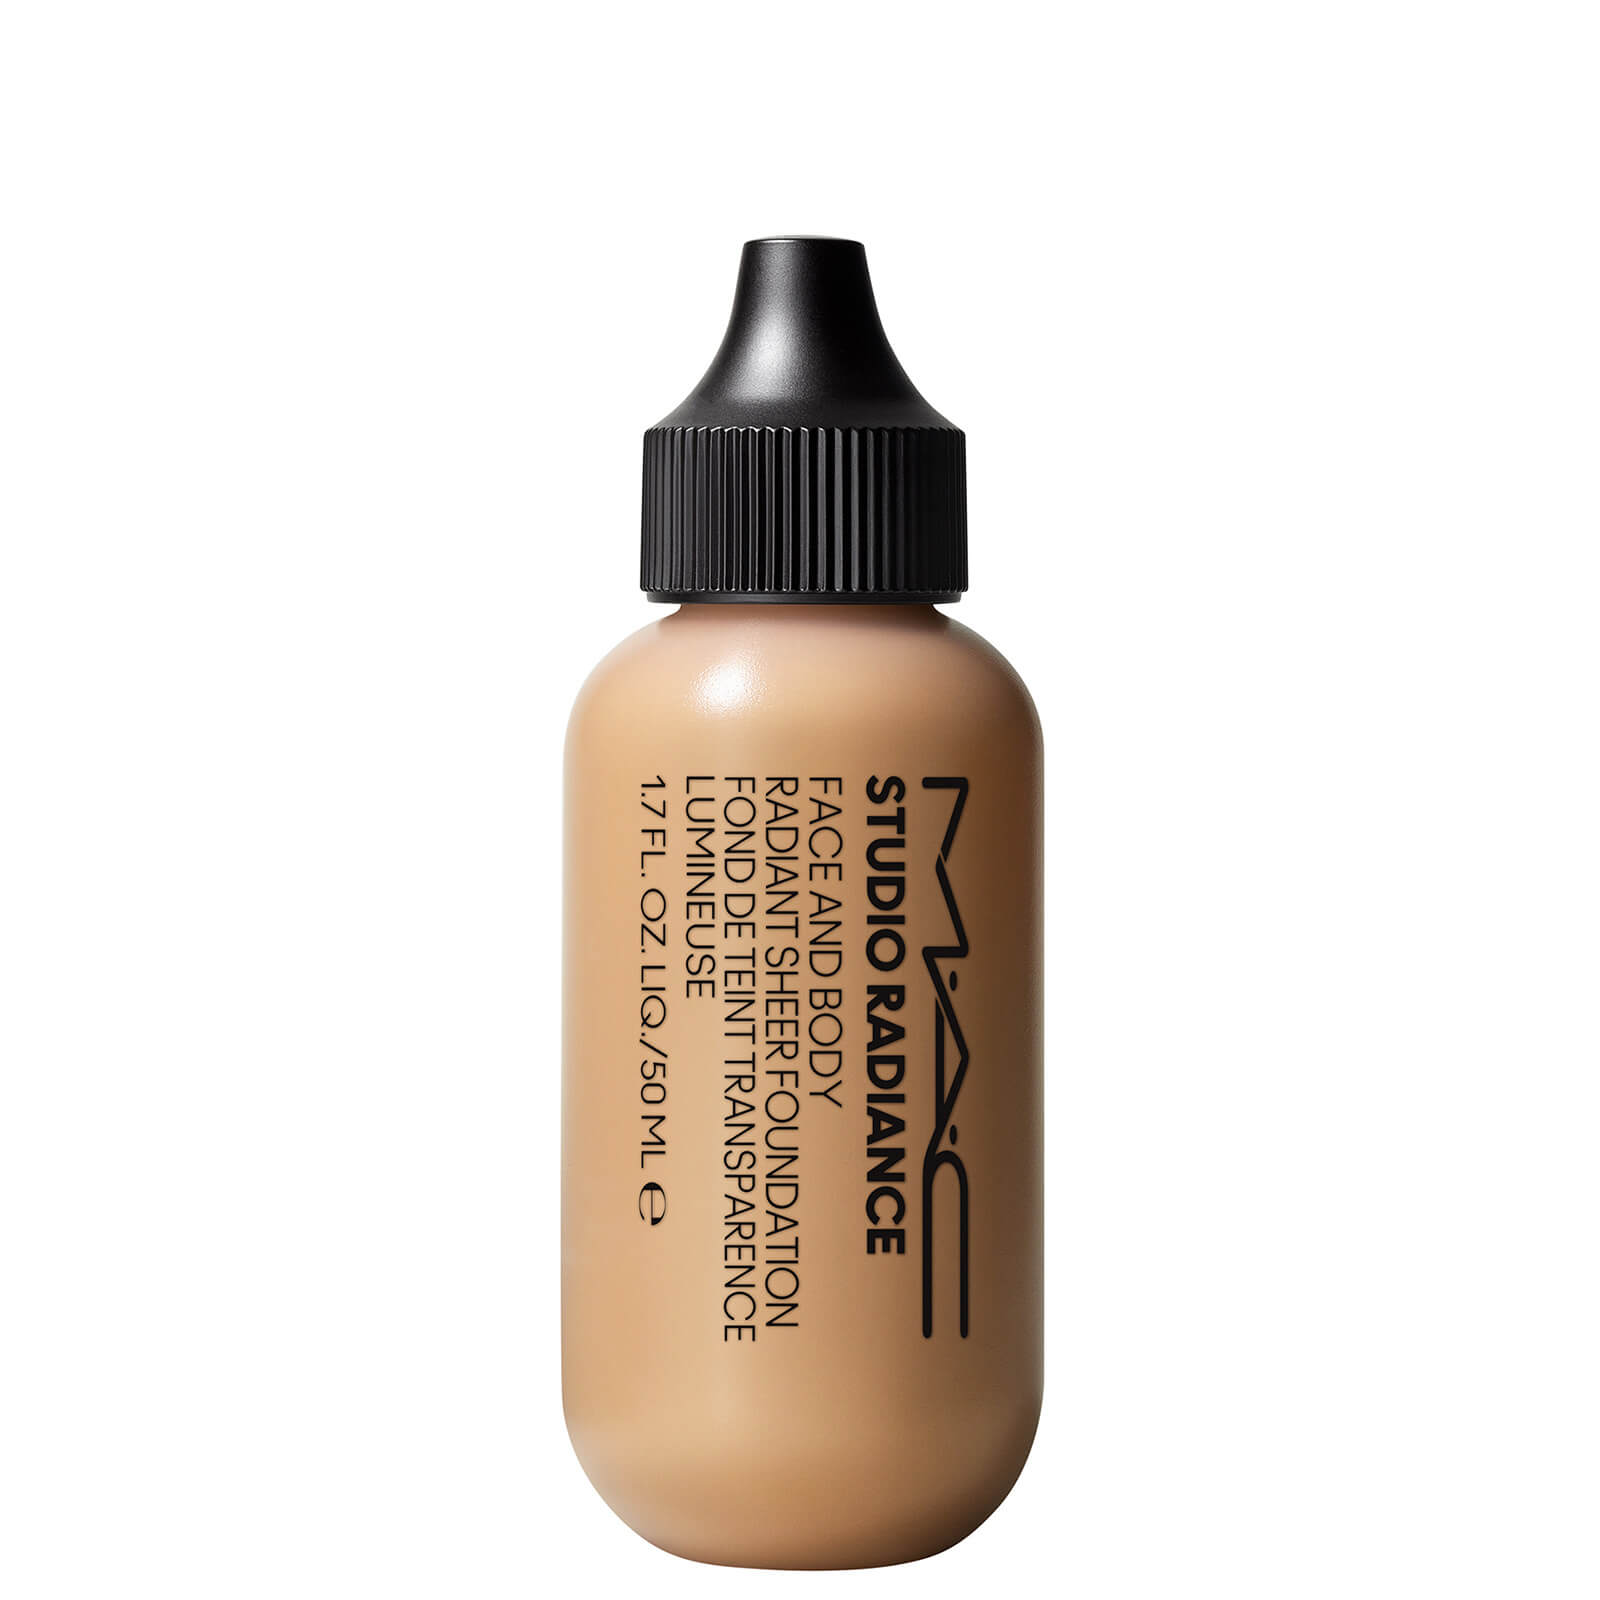 MAC Studio Face and Body Radiant Sheer Foundation 50ml - Various Shades - C2